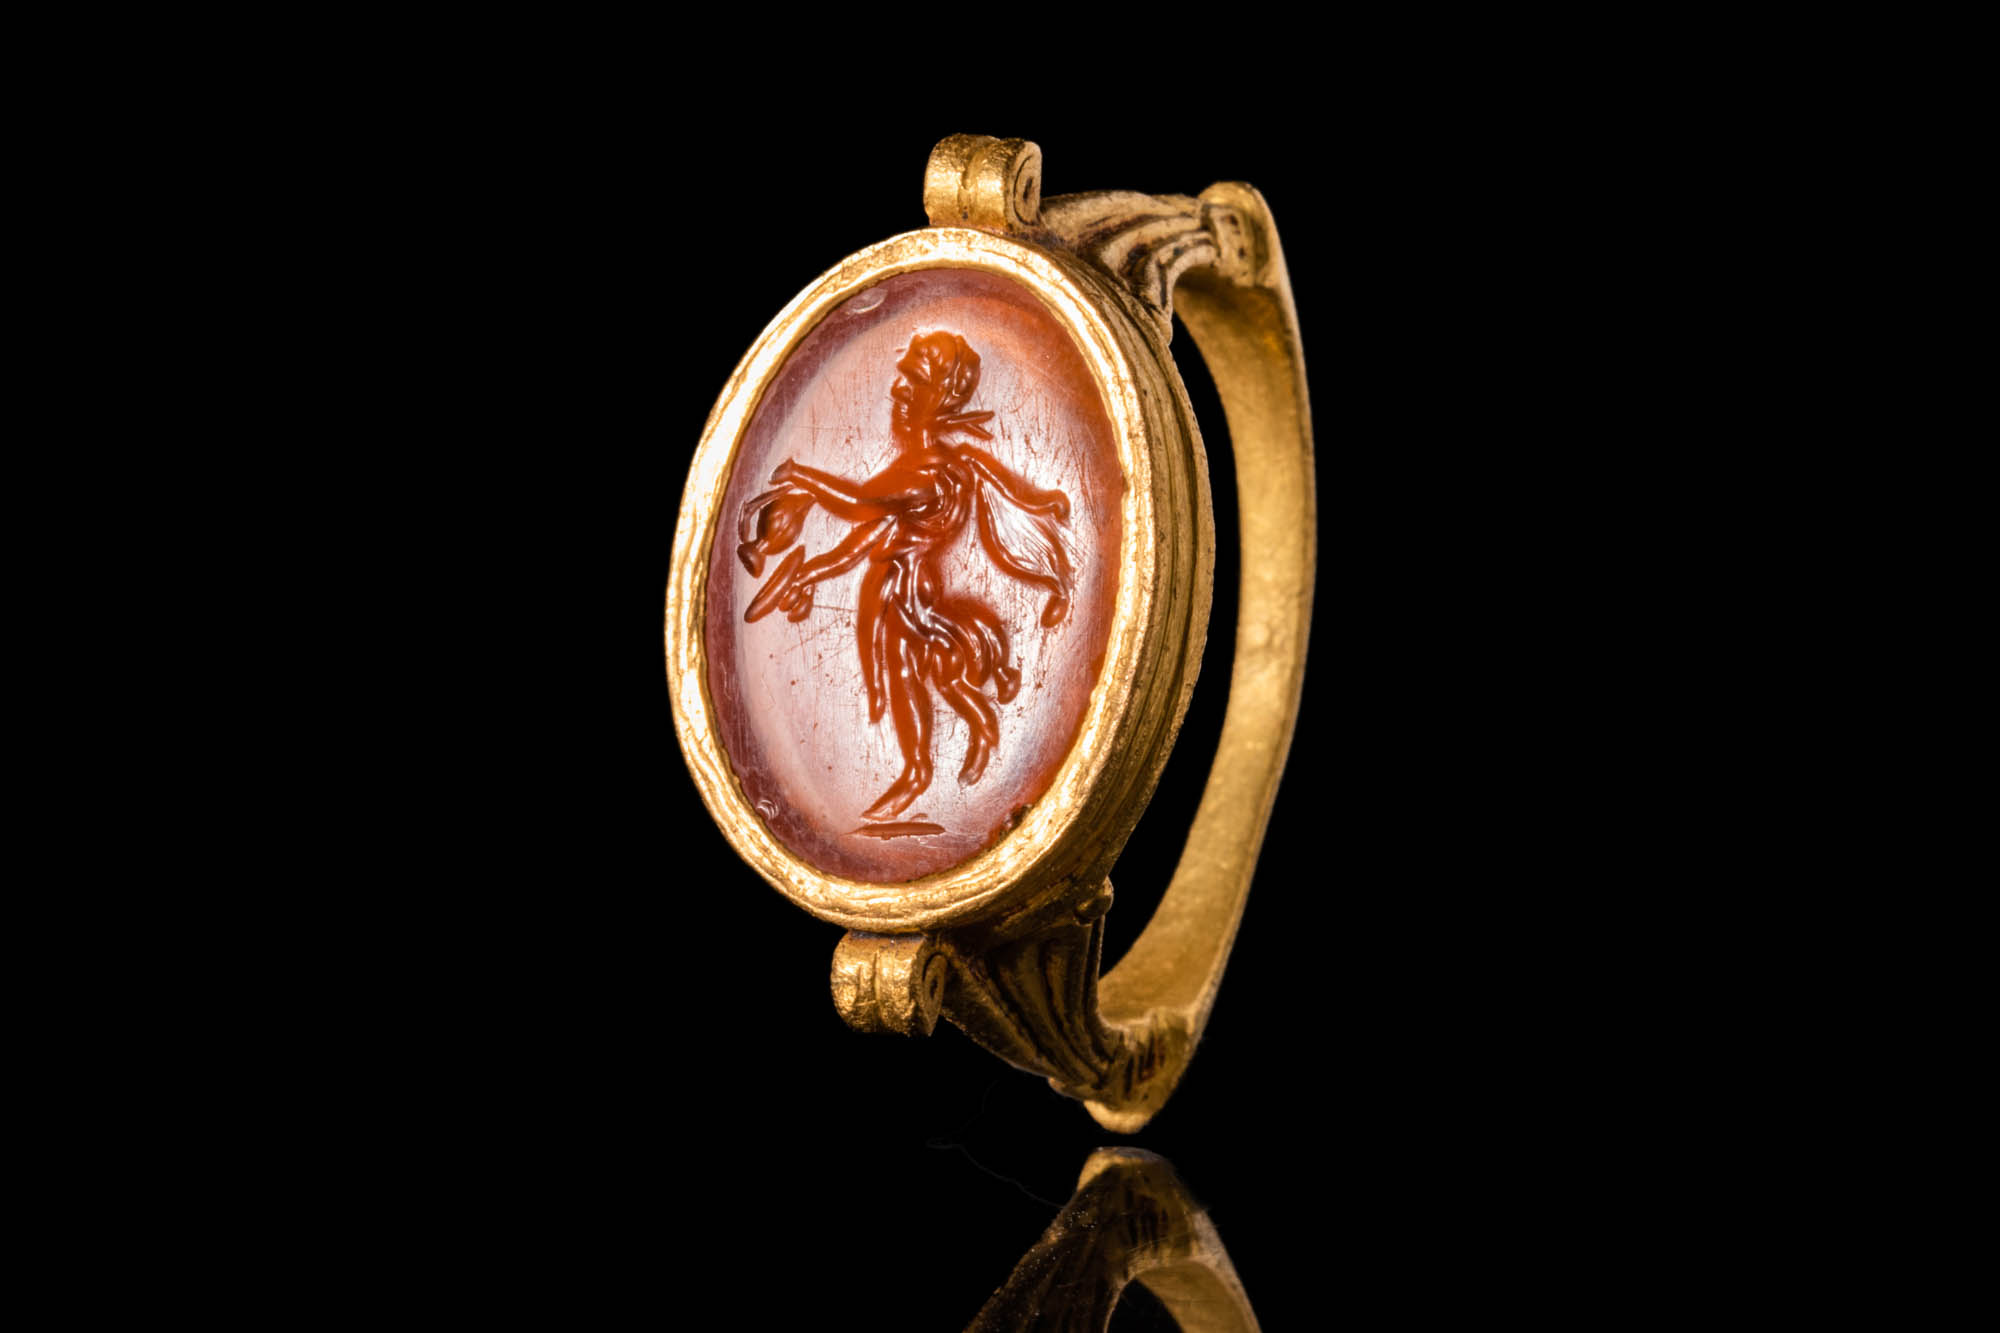 LATE ROMAN GOLD RING WITH INTAGLIO DEPICTING A SATYR